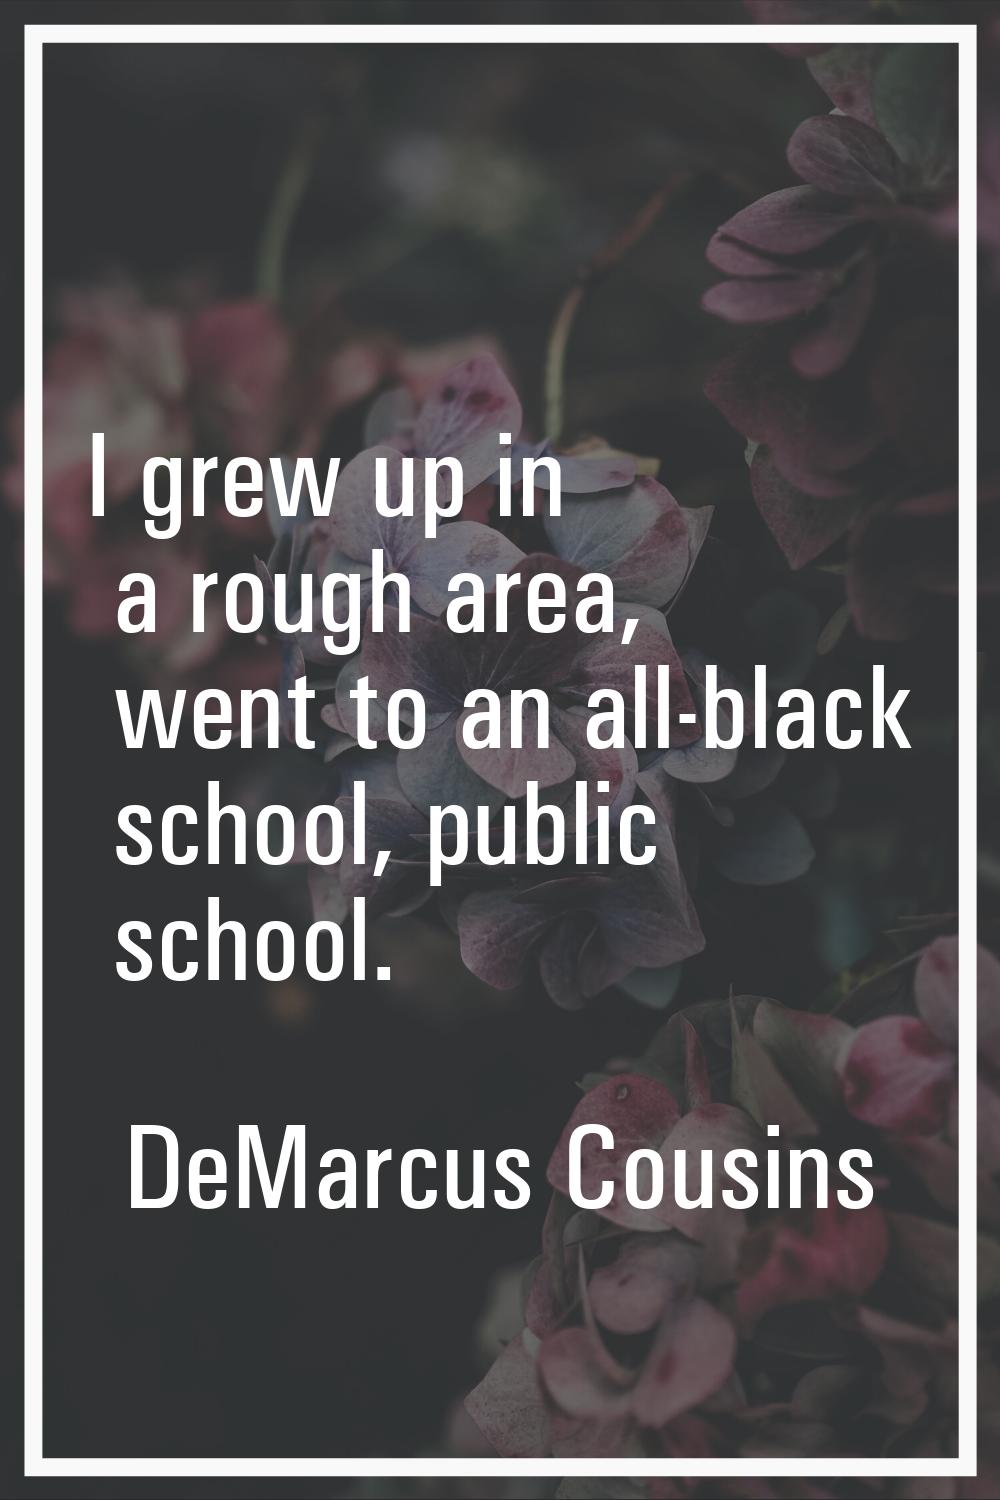 I grew up in a rough area, went to an all-black school, public school.